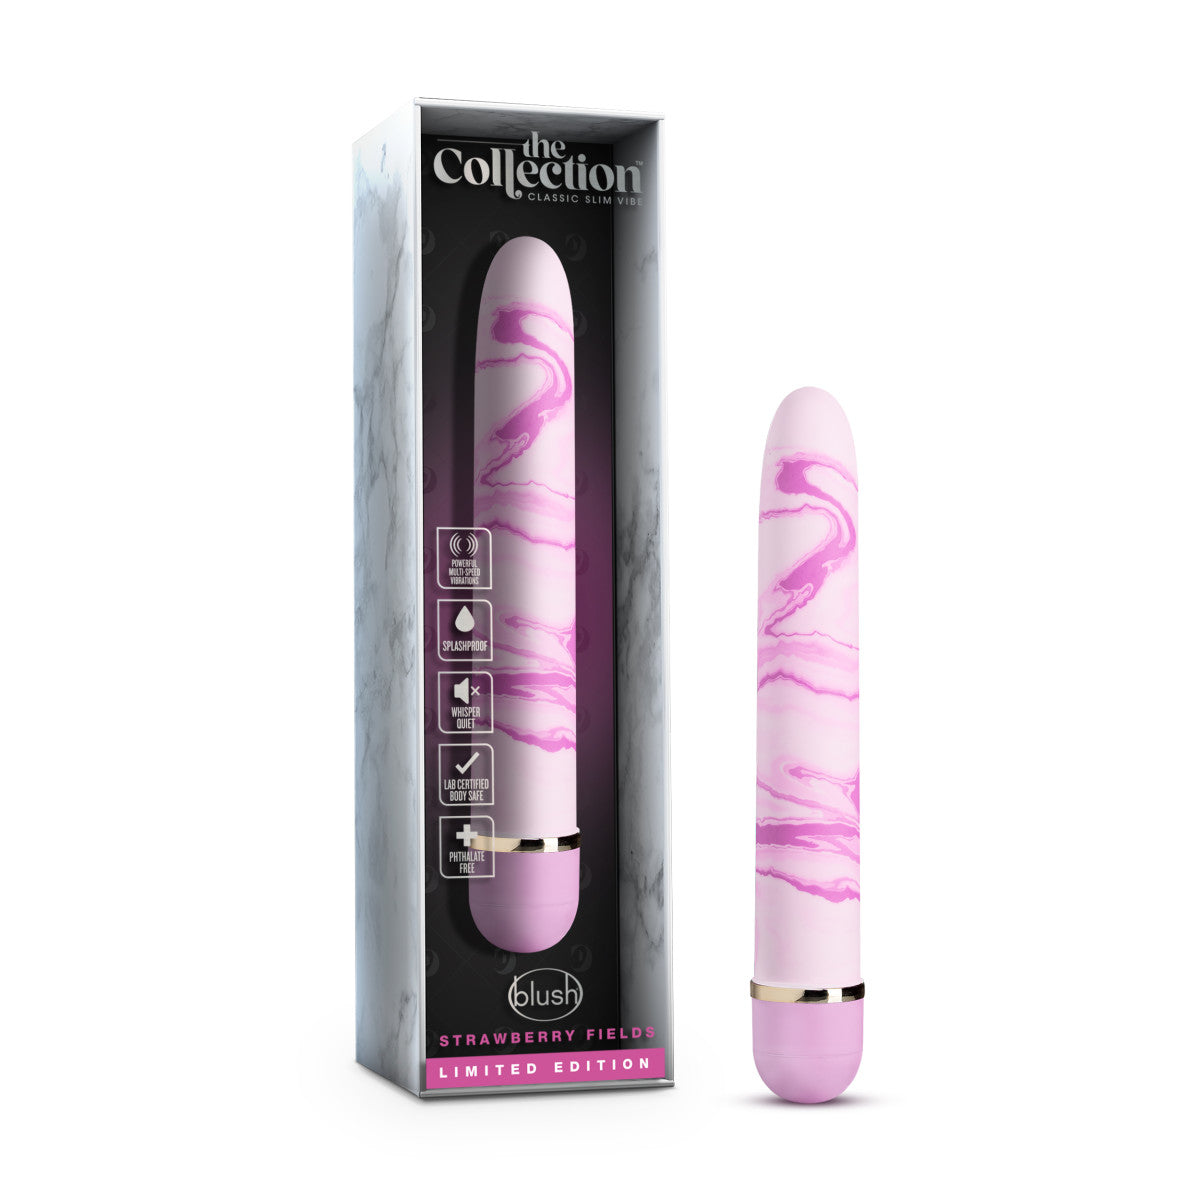 The Collection Strawberry Fields Pink 7-Inch Vibrator